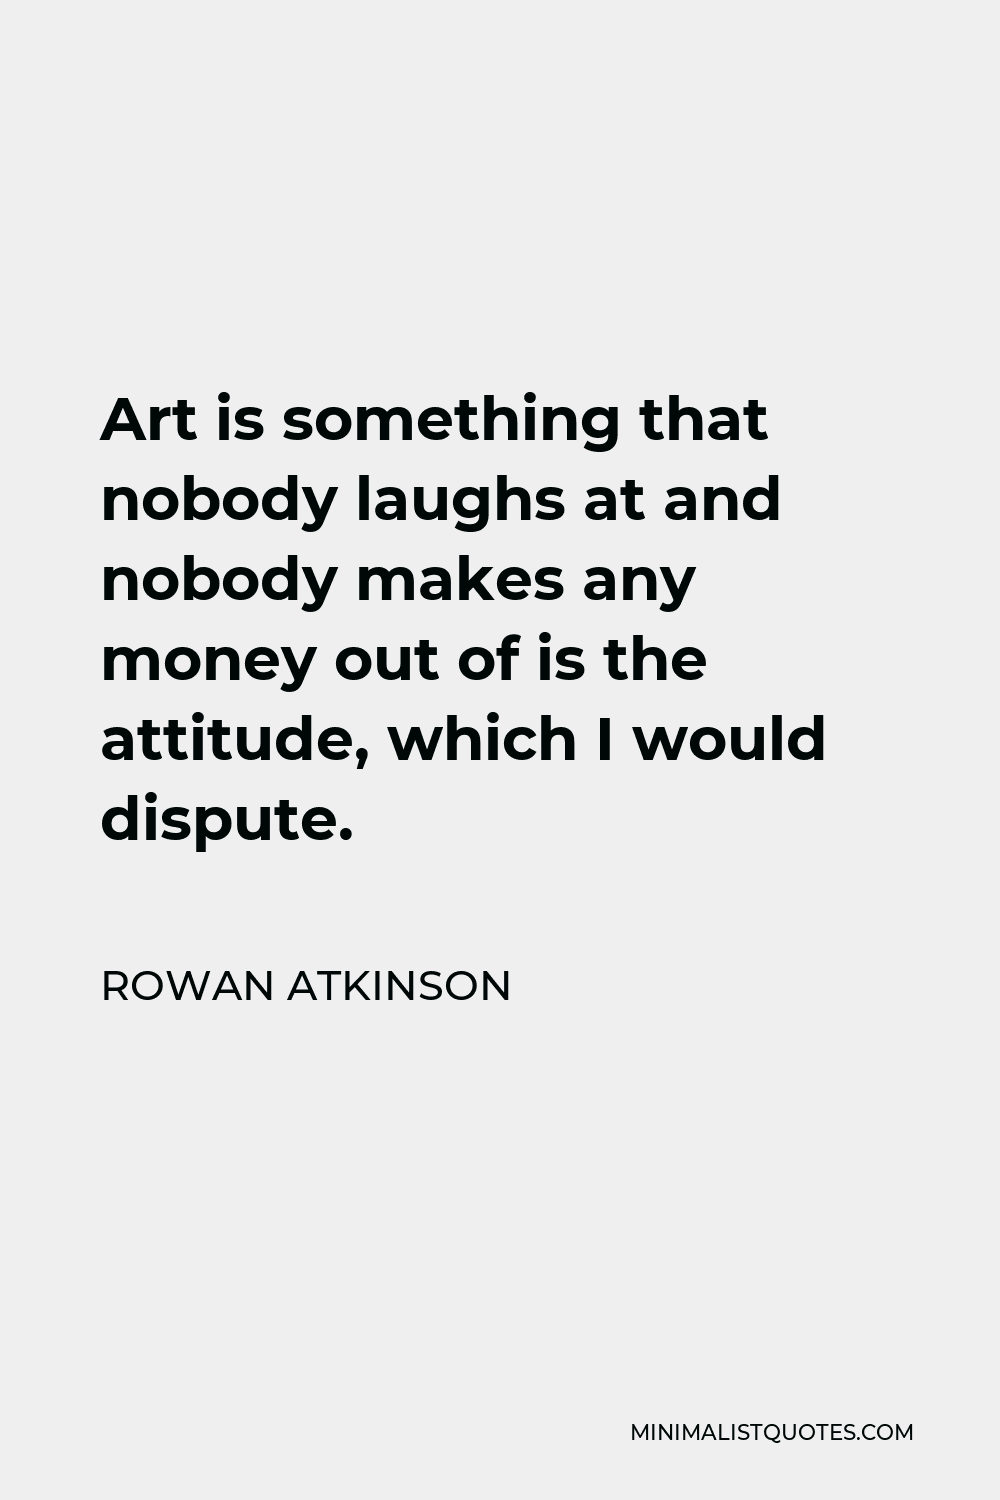 Rowan Atkinson Quote - Art is something that nobody laughs at and nobody makes any money out of is the attitude, which I would dispute.